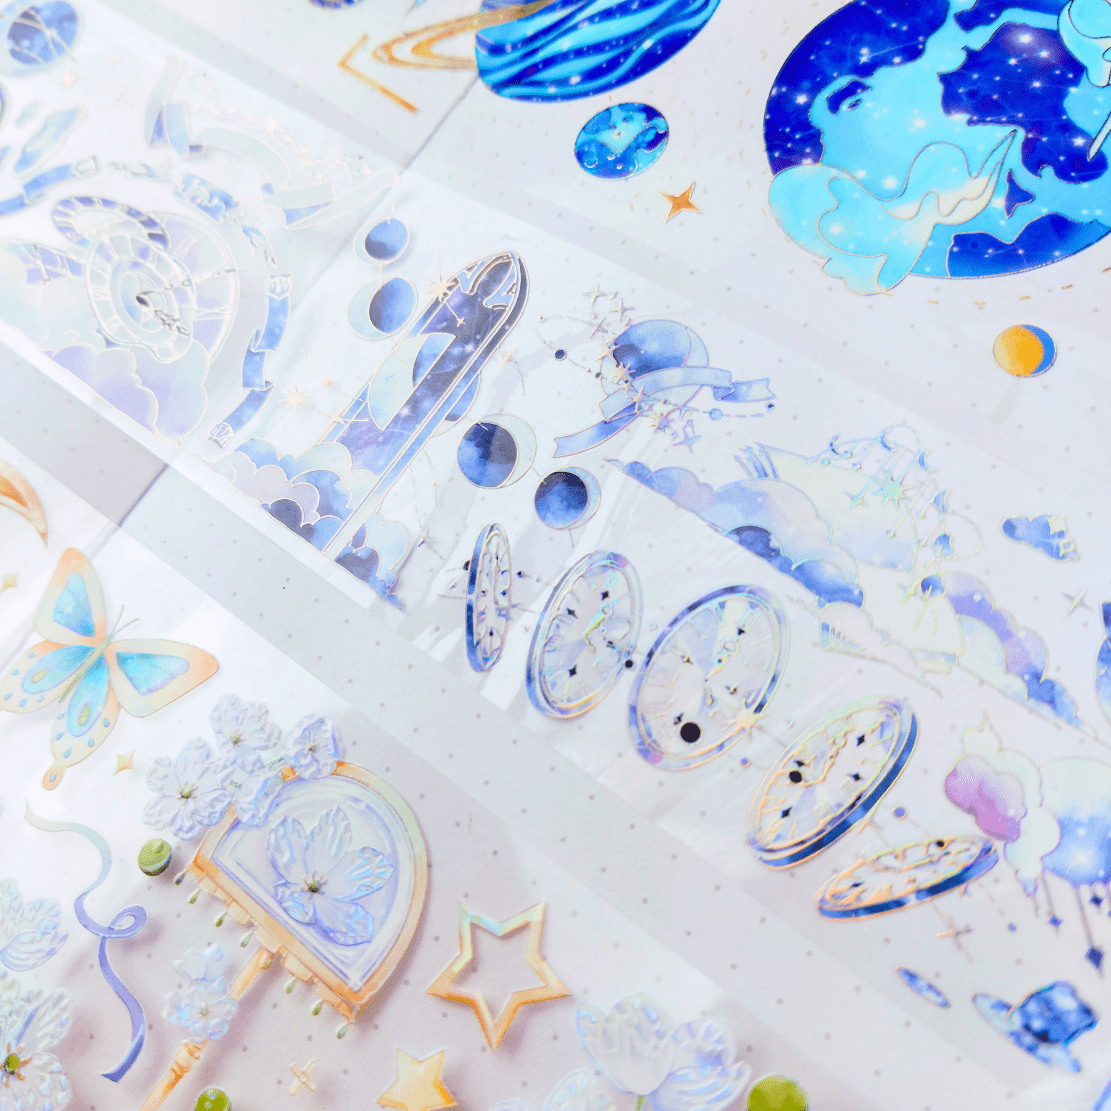 KUMA Stationery & Crafts Stationery NEW✨Glossy Luna Washi Tape Set of 3 - add on only with our Luna Bullet Journals -